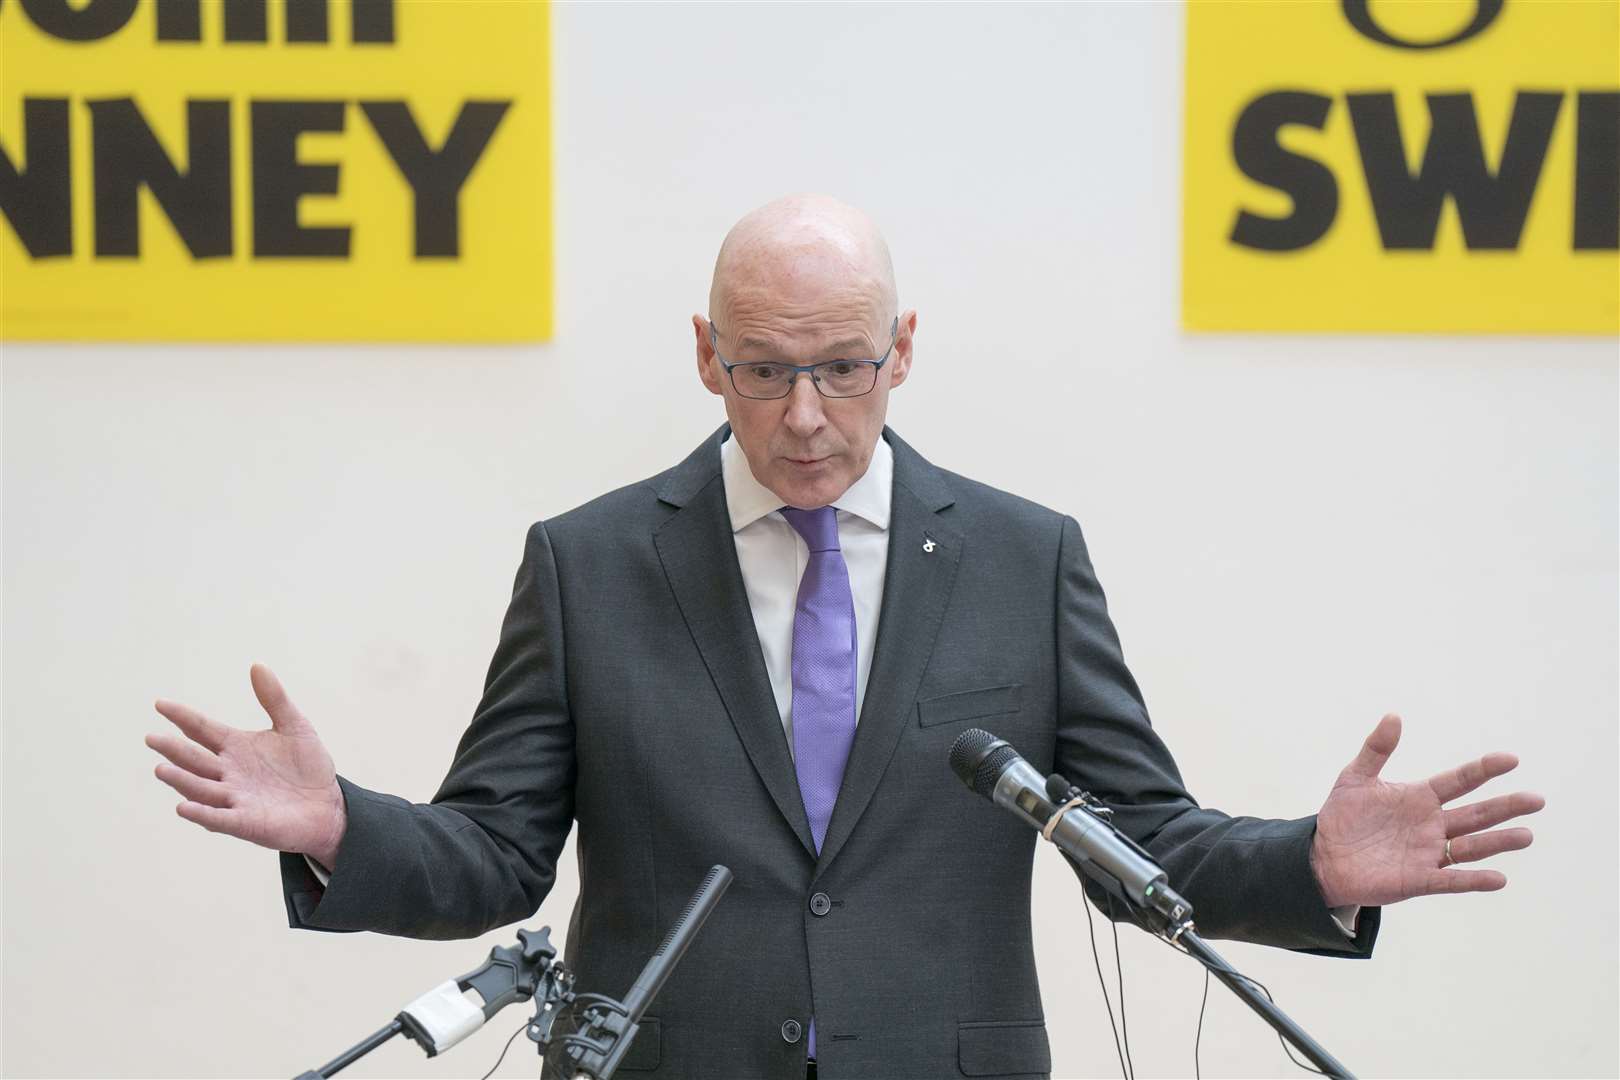 John Swinney is now expected to become Scotland’s next first minister, after becoming leader of the SNP unopposed on Monday (Jane Barlow/PA)